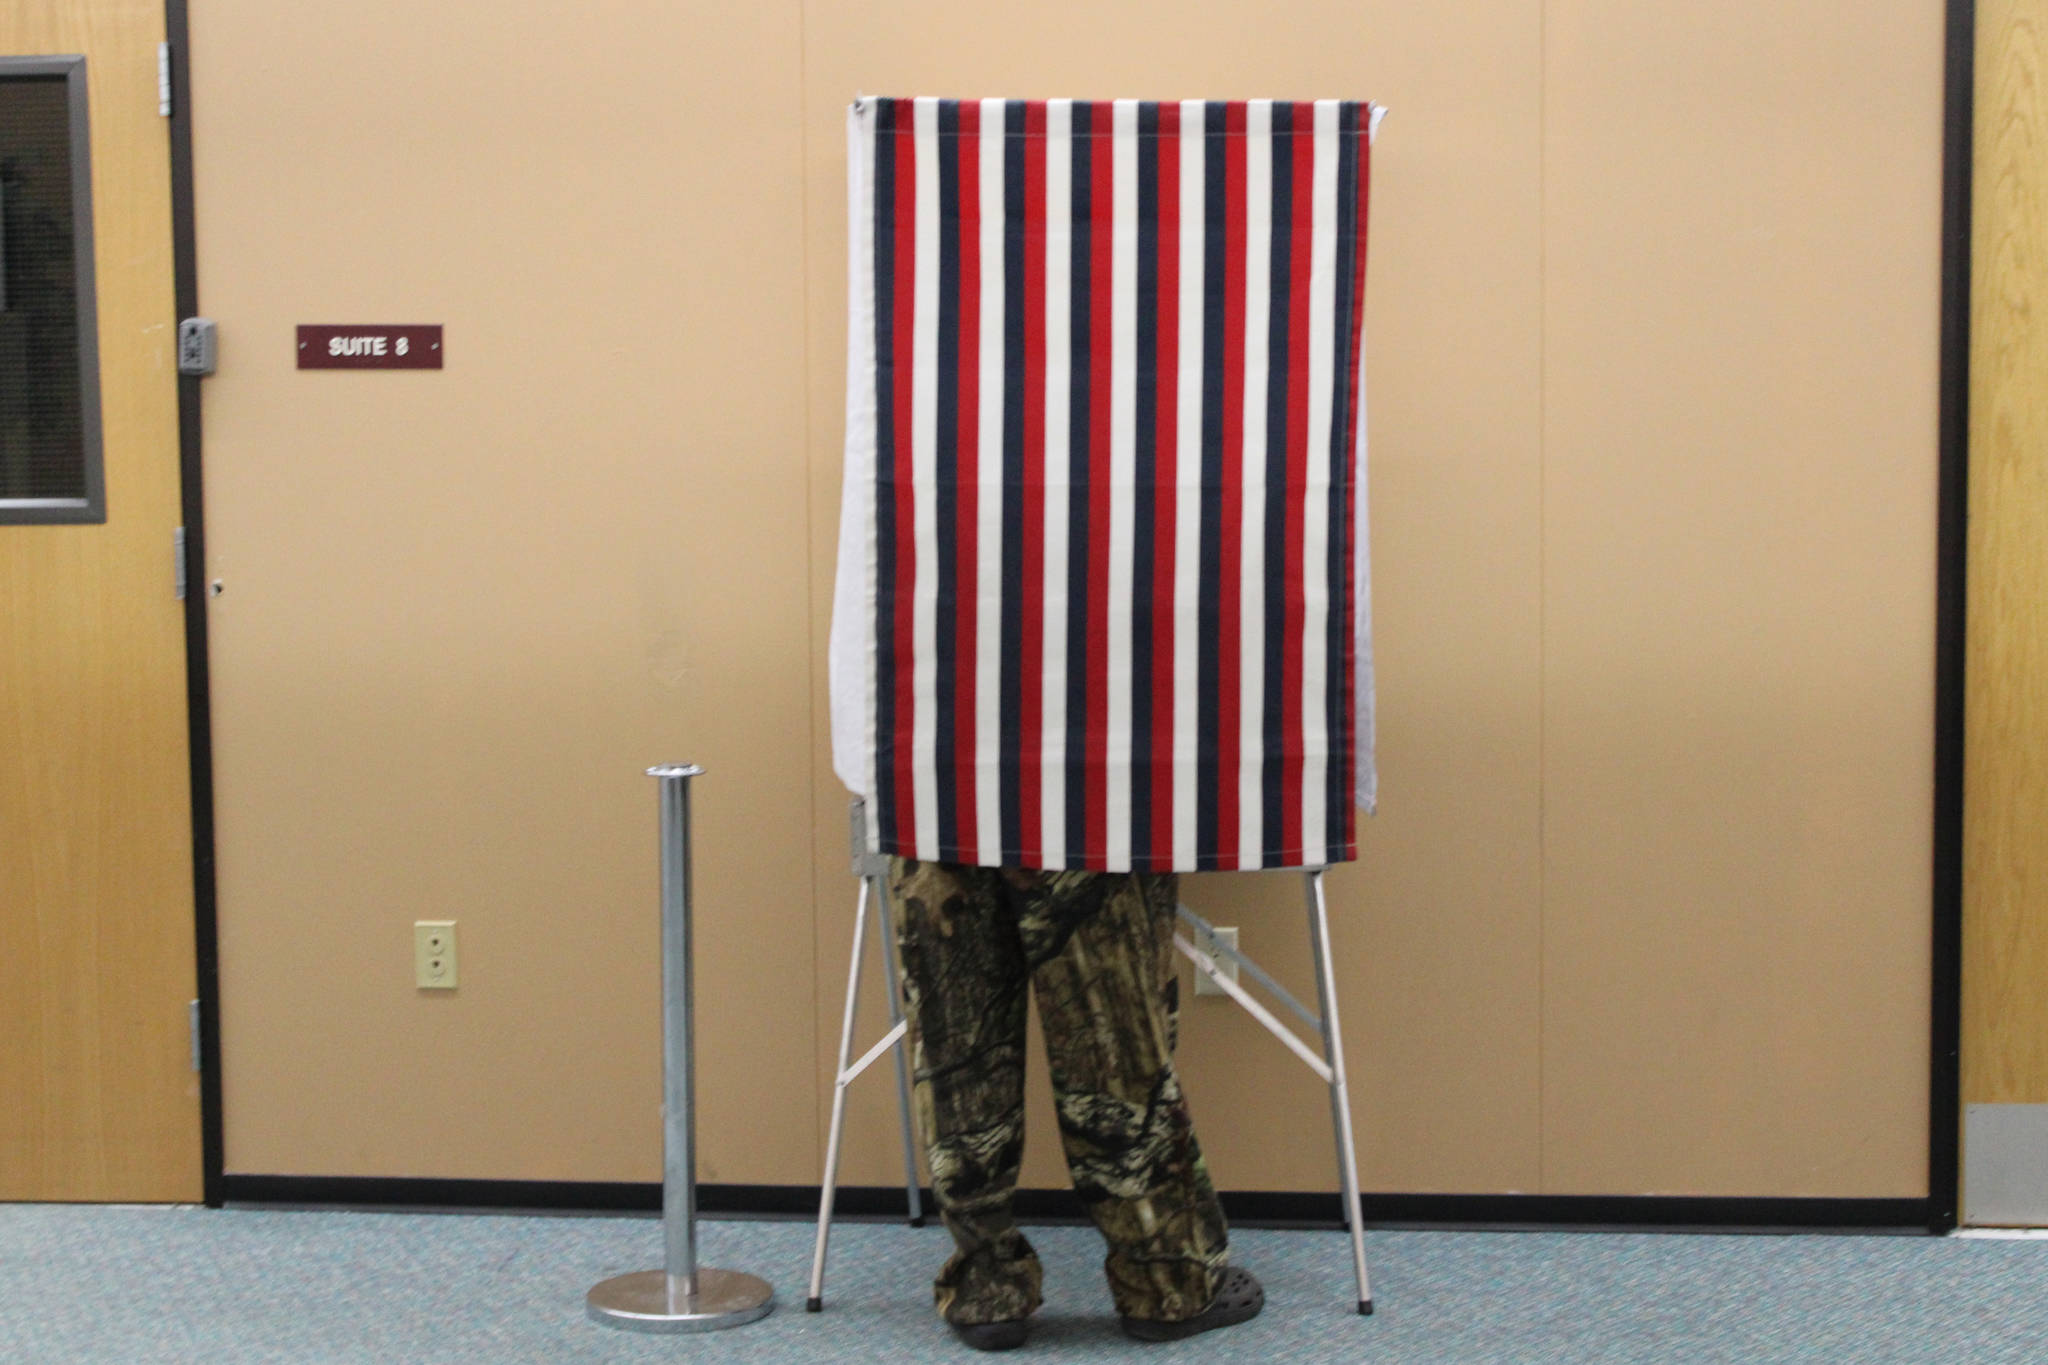 A man votes takes advantage of early voting at the Mendenhall Mall on Oct. 22, 2020. The FBI issued public guidance ahead of the General Election warning voters about what is and isn't federal election crime, and how to report such crimes if they're spotted. (Ben Hohenstatt / Juneau Empire)